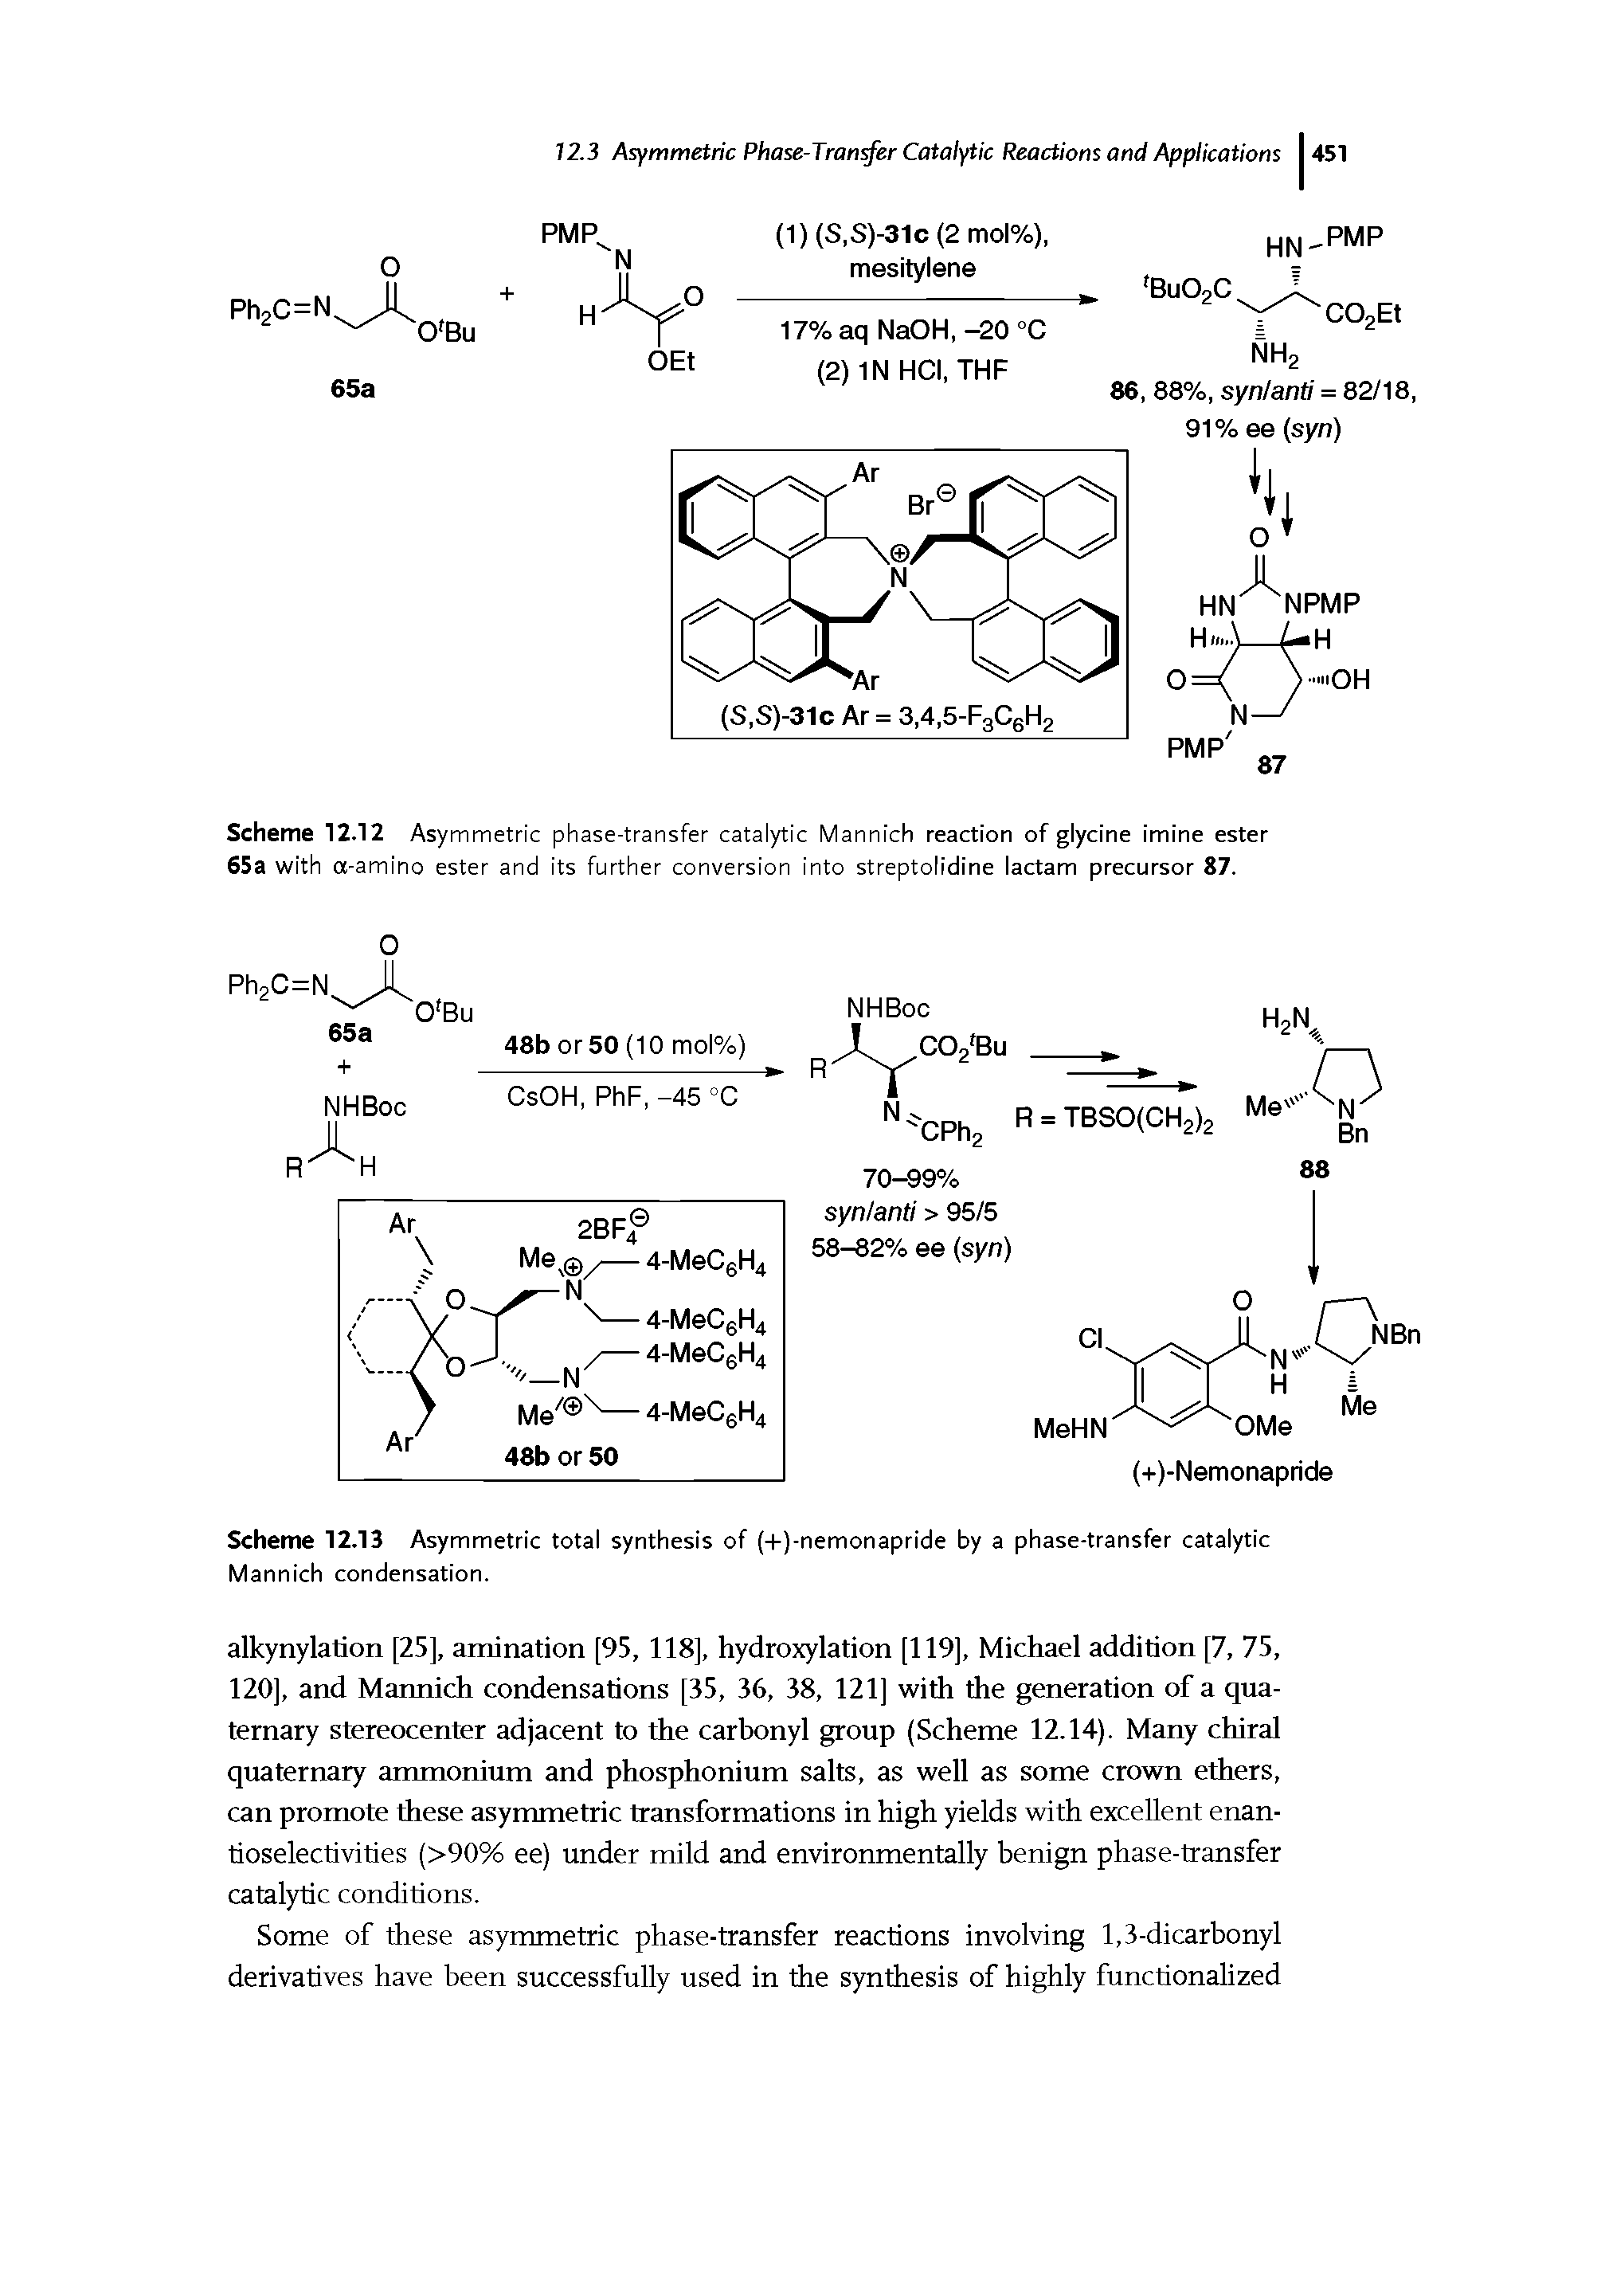 Scheme 12.12 Asymmetric phase-transfer catalytic Mannich reaction of glycine imine ester 65a with a-amino ester and its further conversion into streptolidine lactam precursor 87.